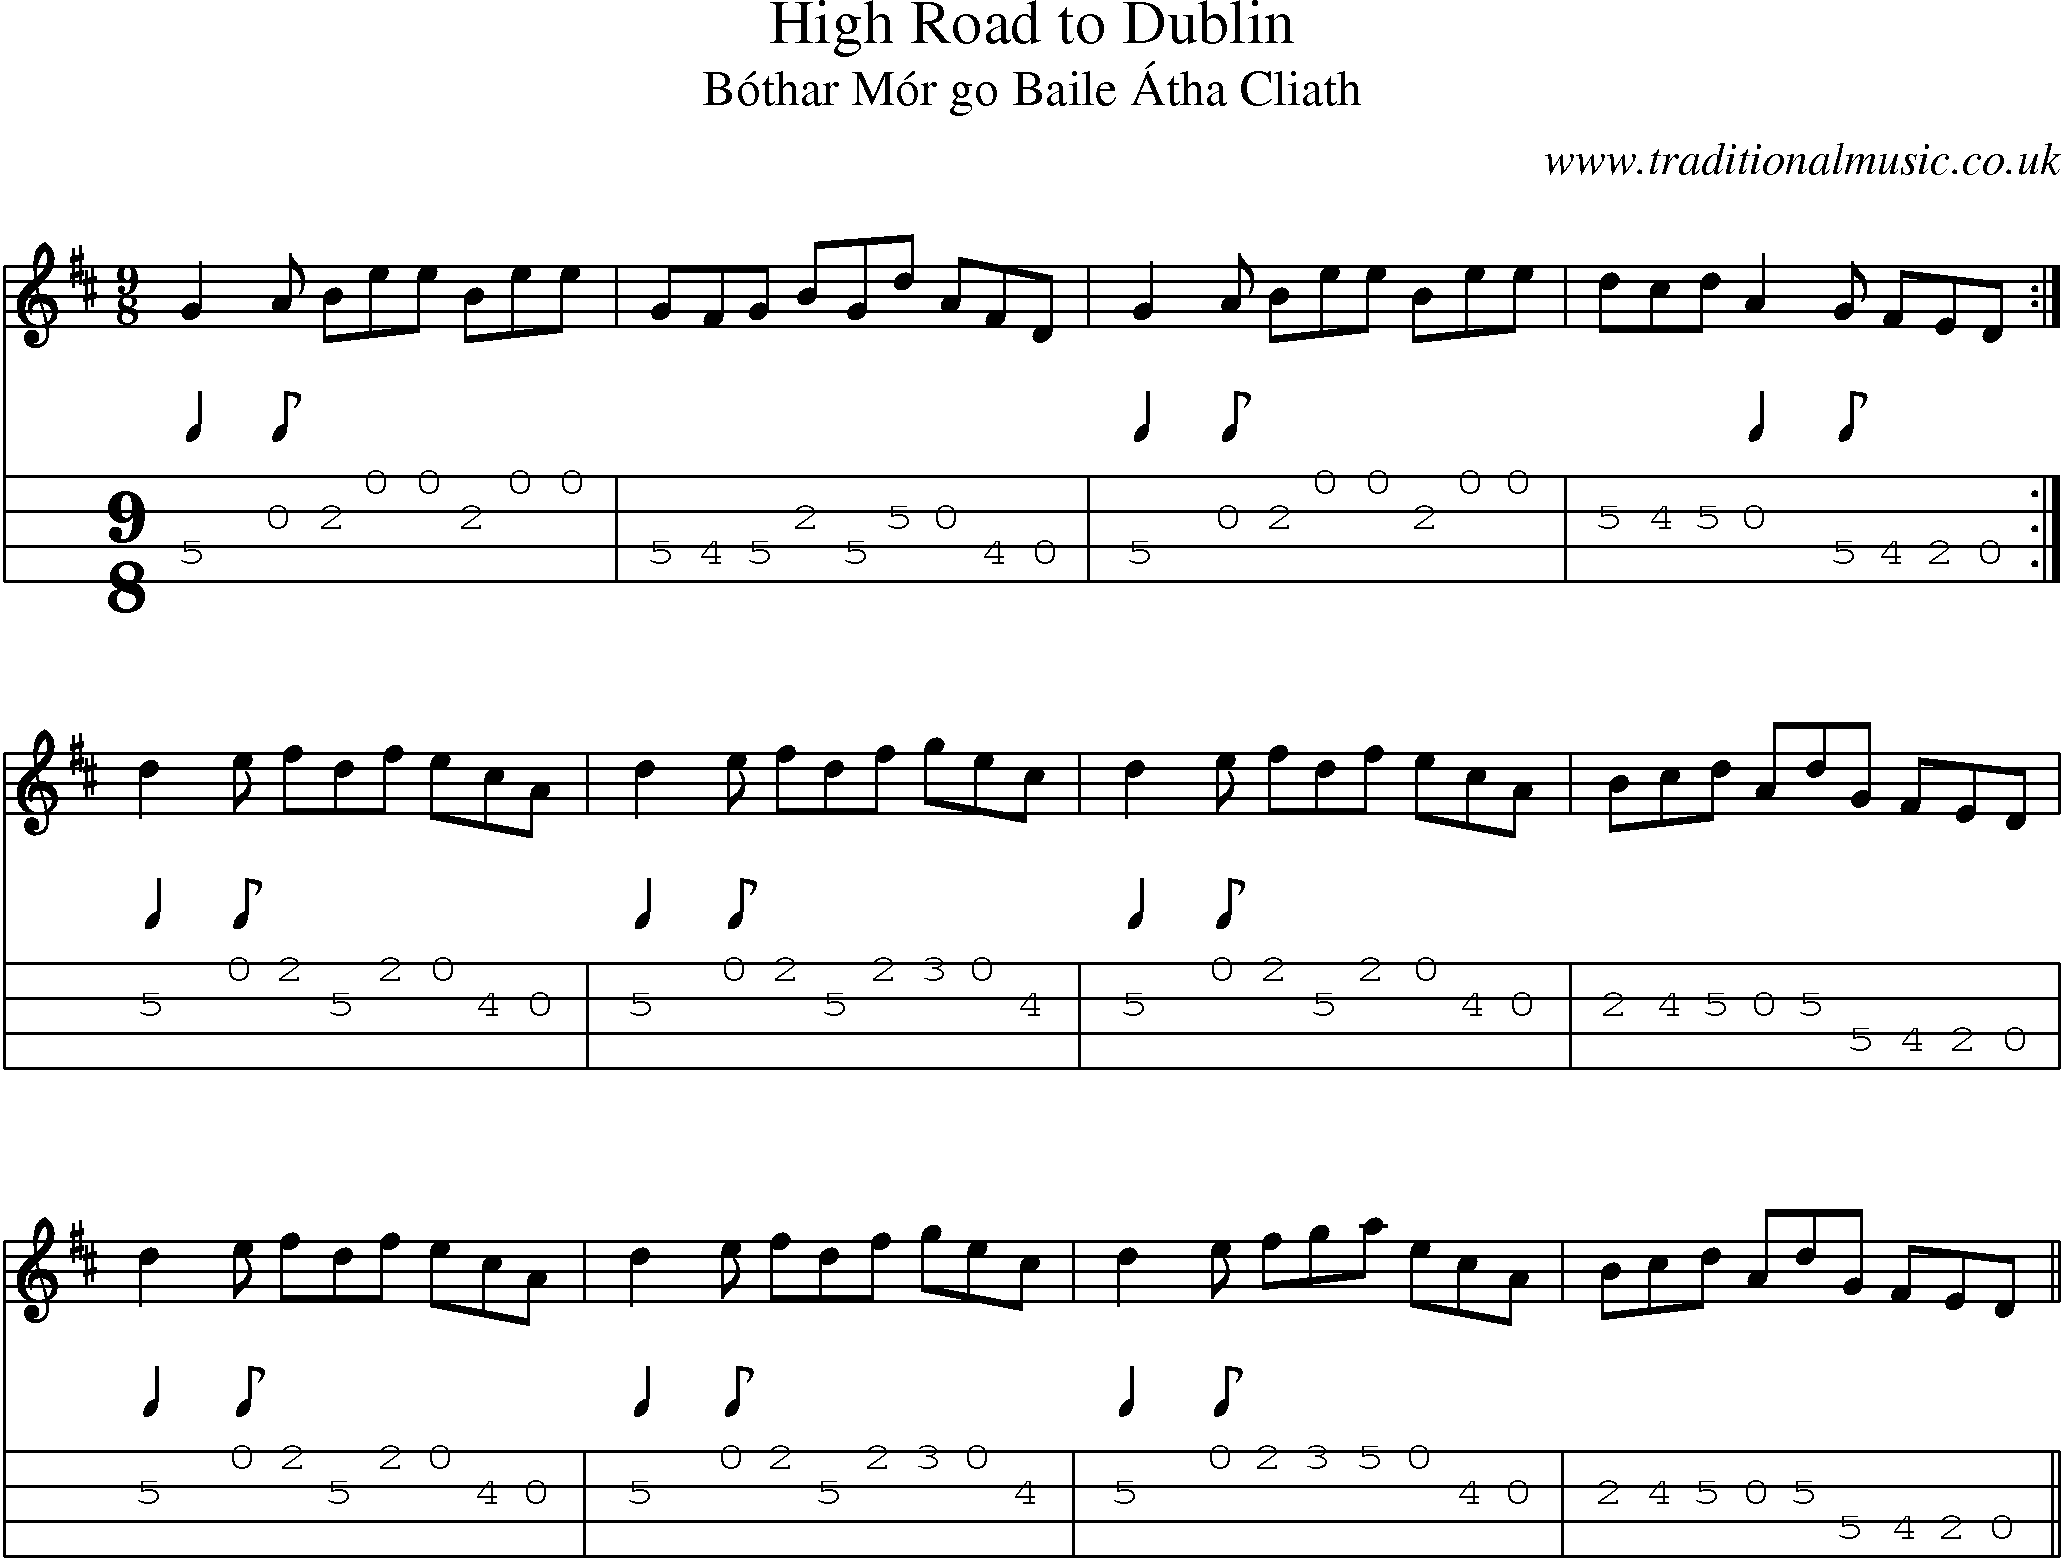 Music Score and Mandolin Tabs for High Road To Dublin